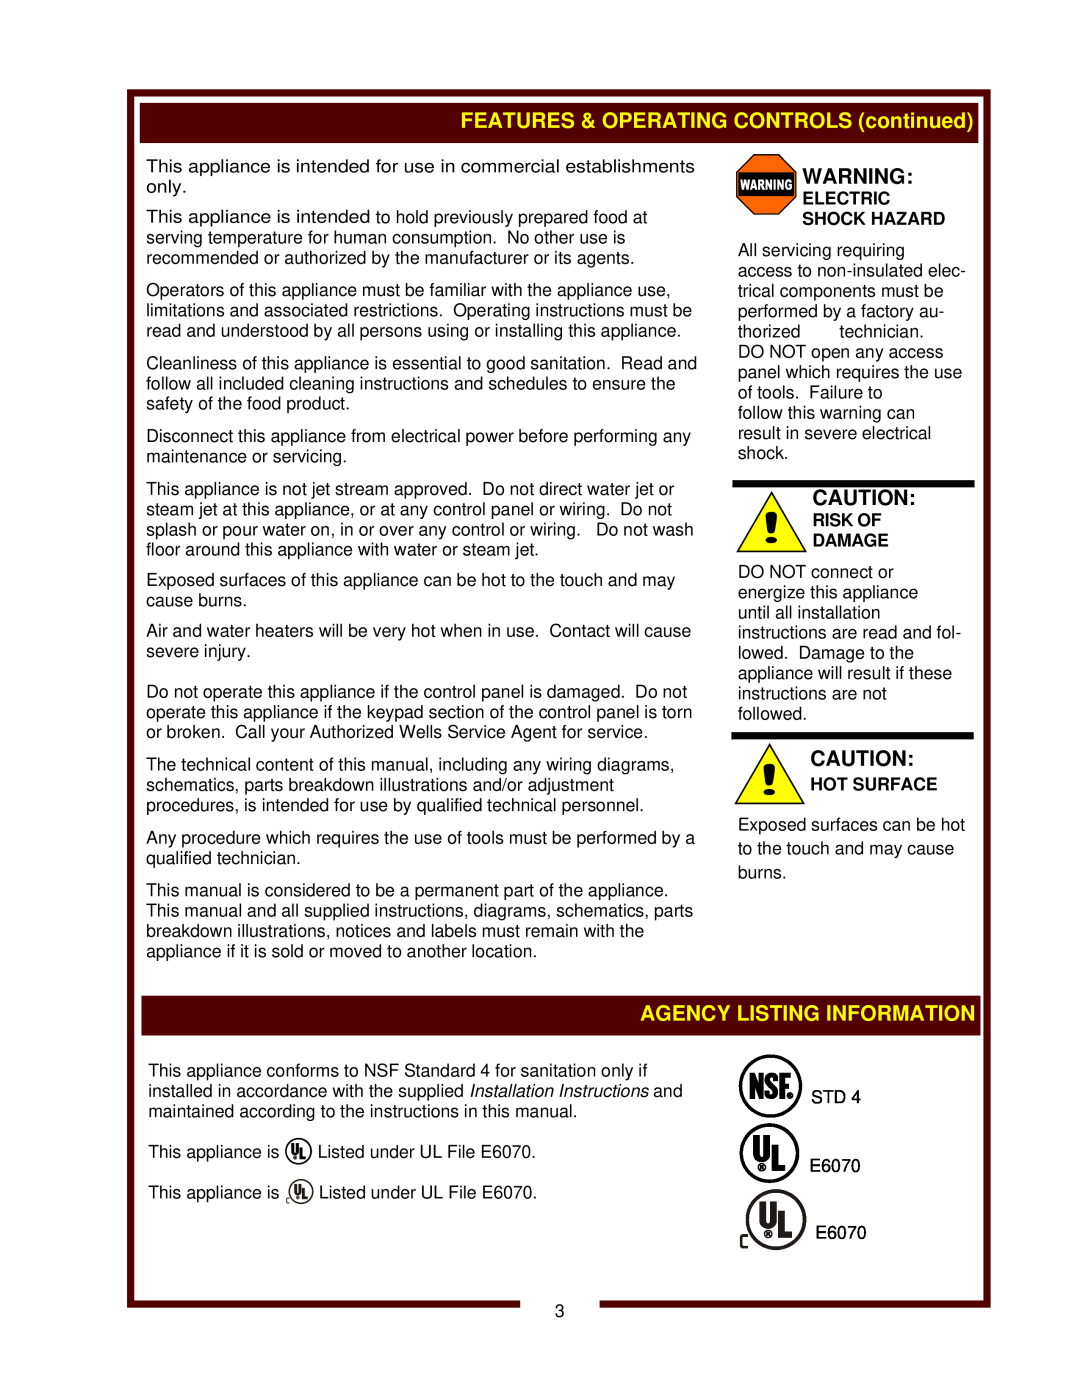 Wells HDW-2 operation manual Agency Listing Information, Electric Shock Hazard, Risk Of Damage, Hot Surface 